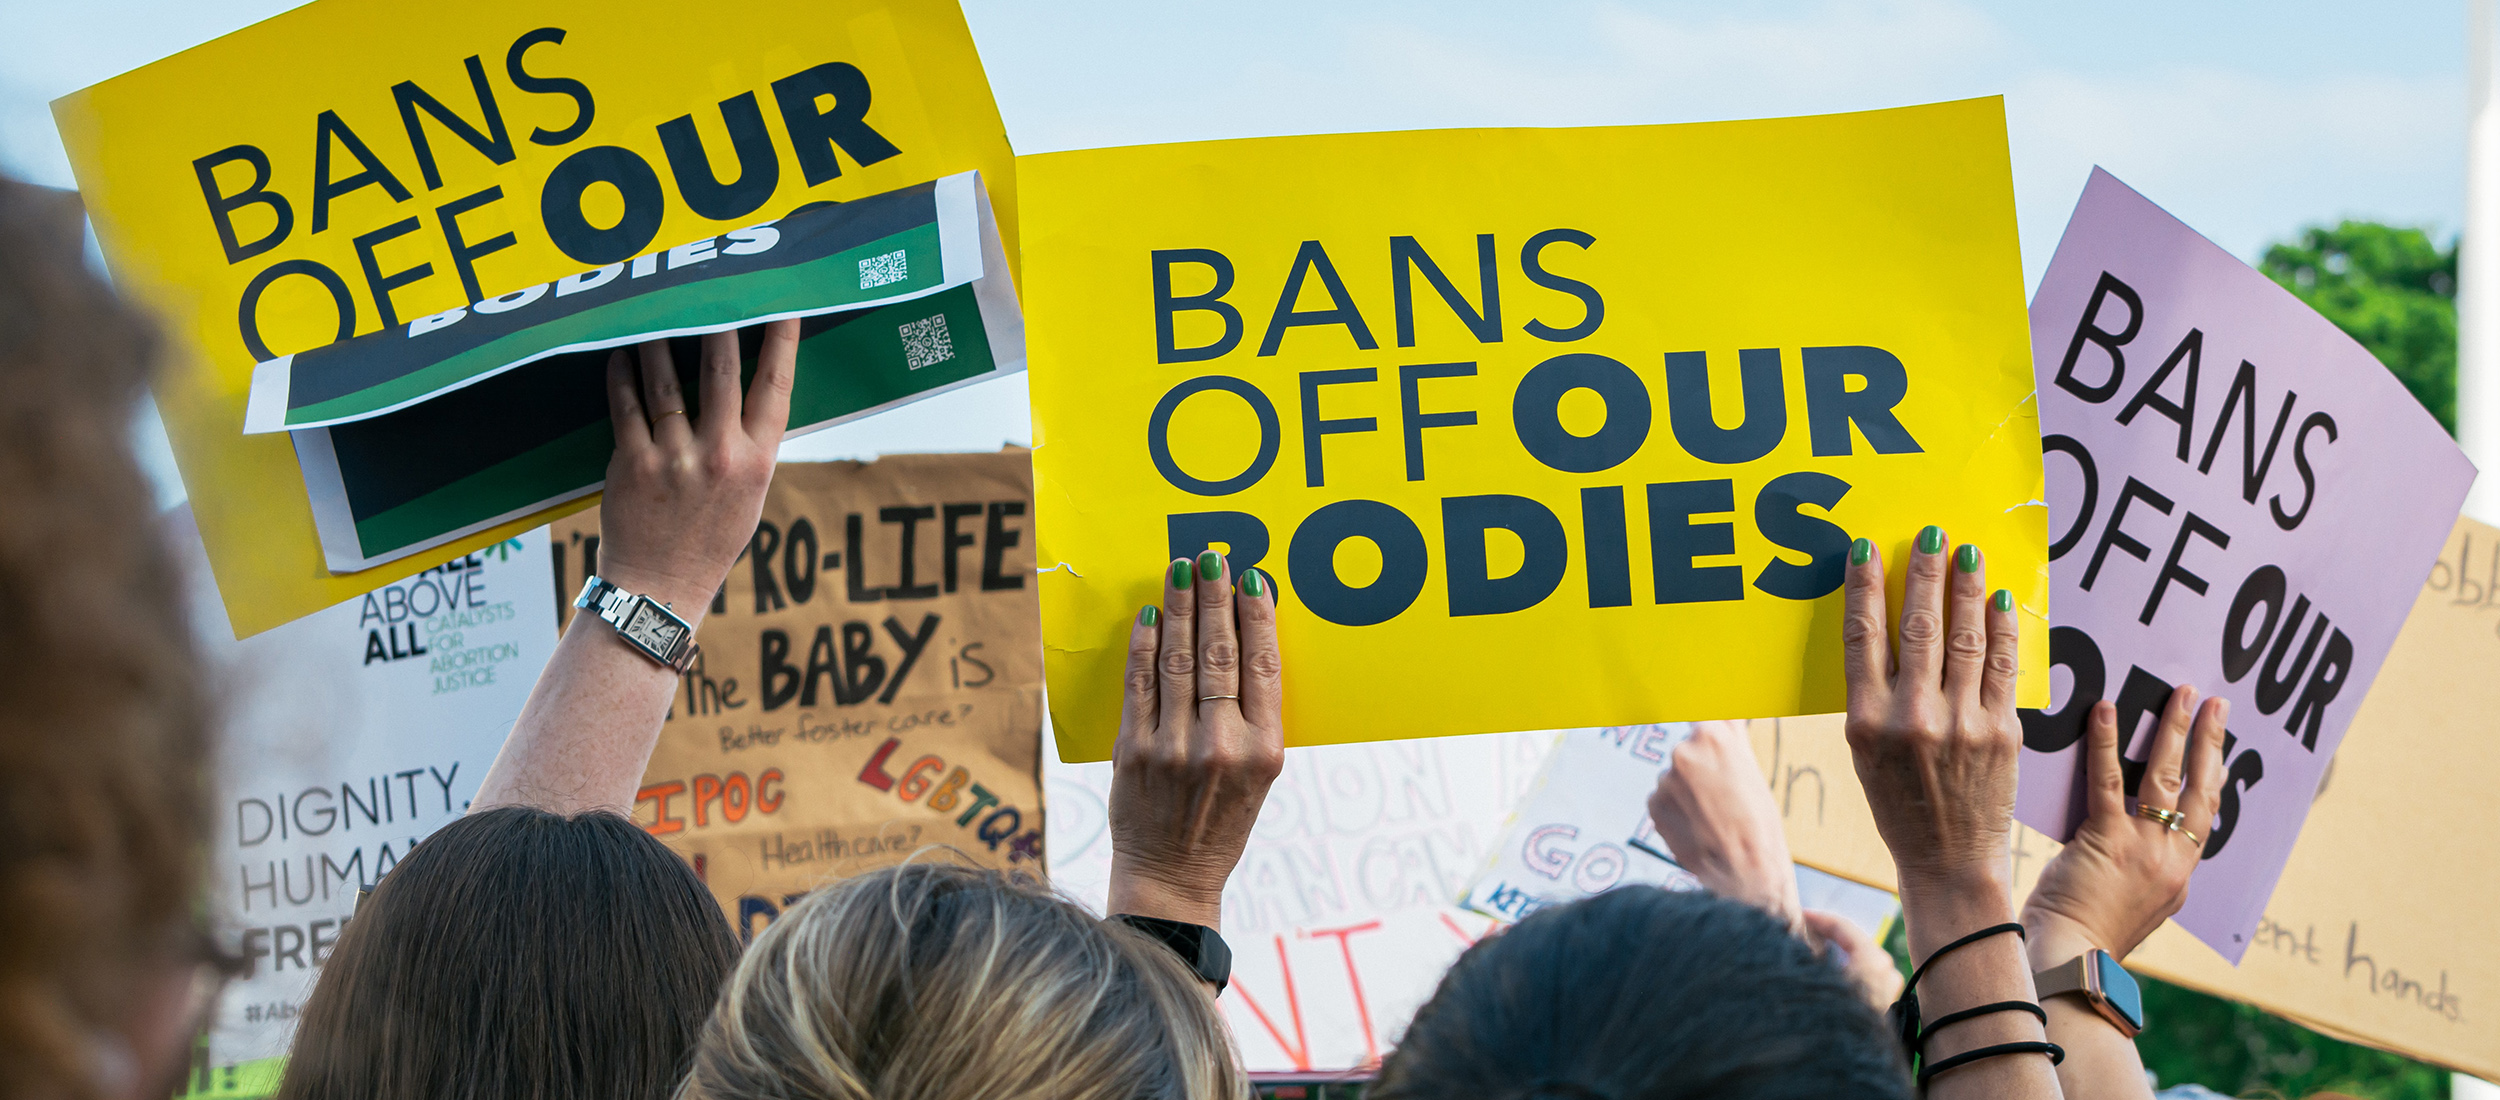 protestors hold signs that say "bans off our bodies"